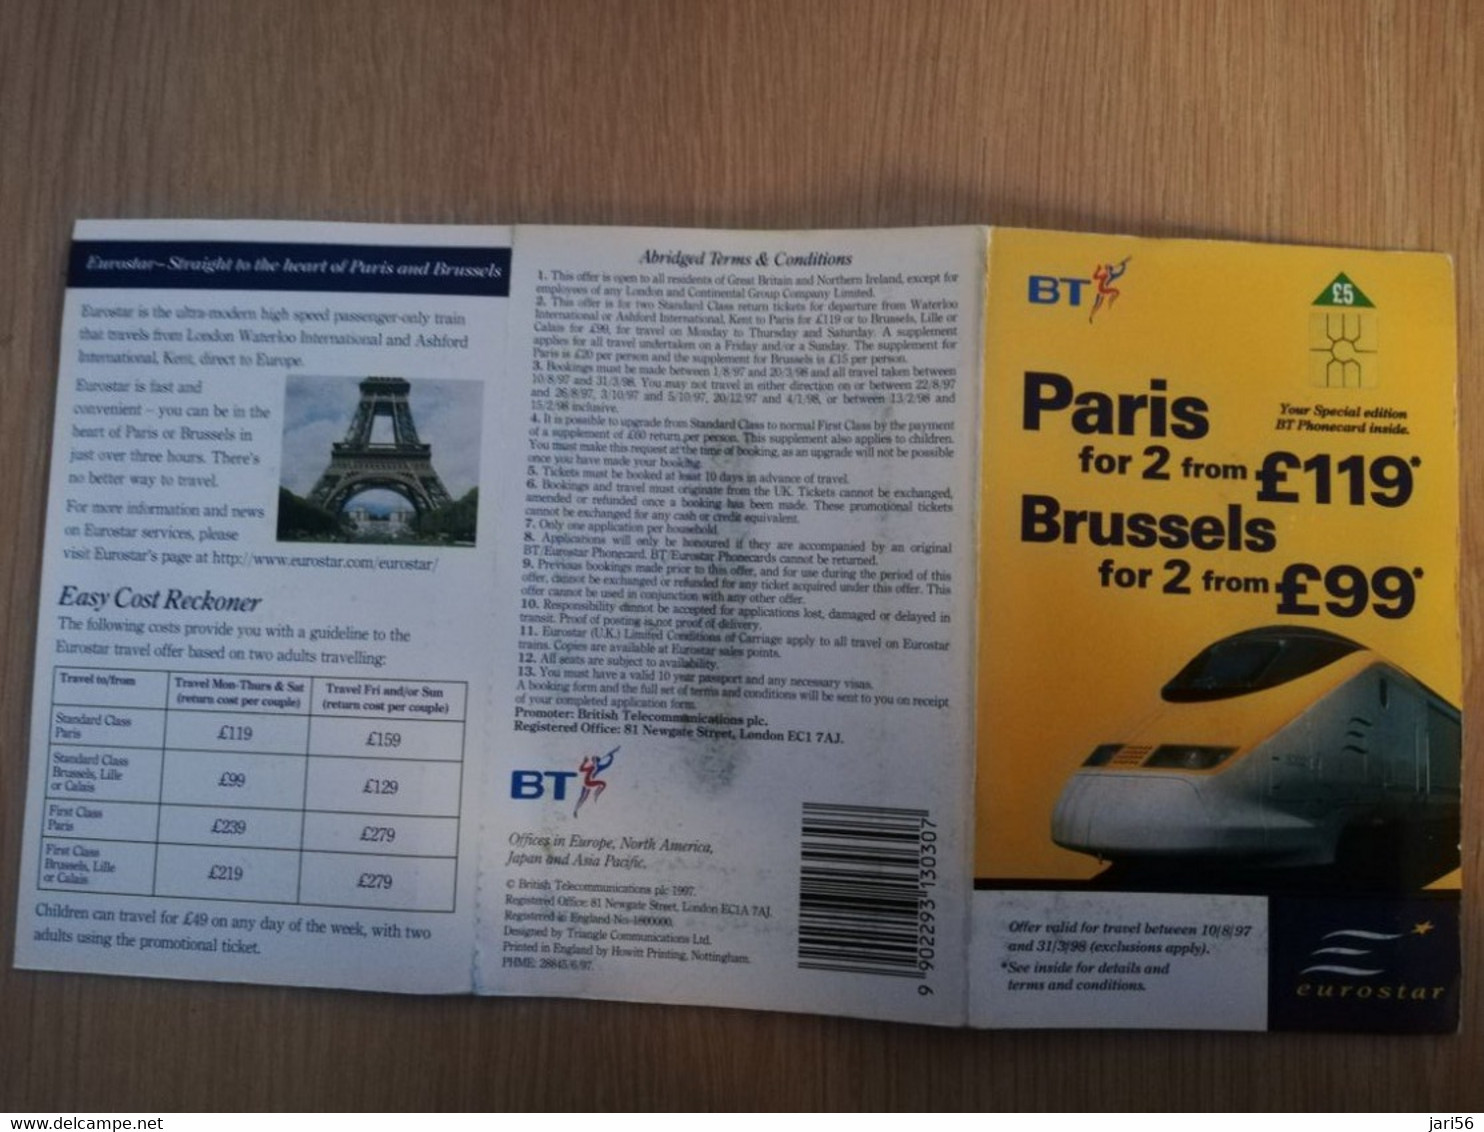 GREAT BRETAGNE  CHIPCARDS  EUROSTAR /SPECIAL FOLDER       5 POUND Sealed In Wrapper    MINT CONDITION      **3860** - BT Generales